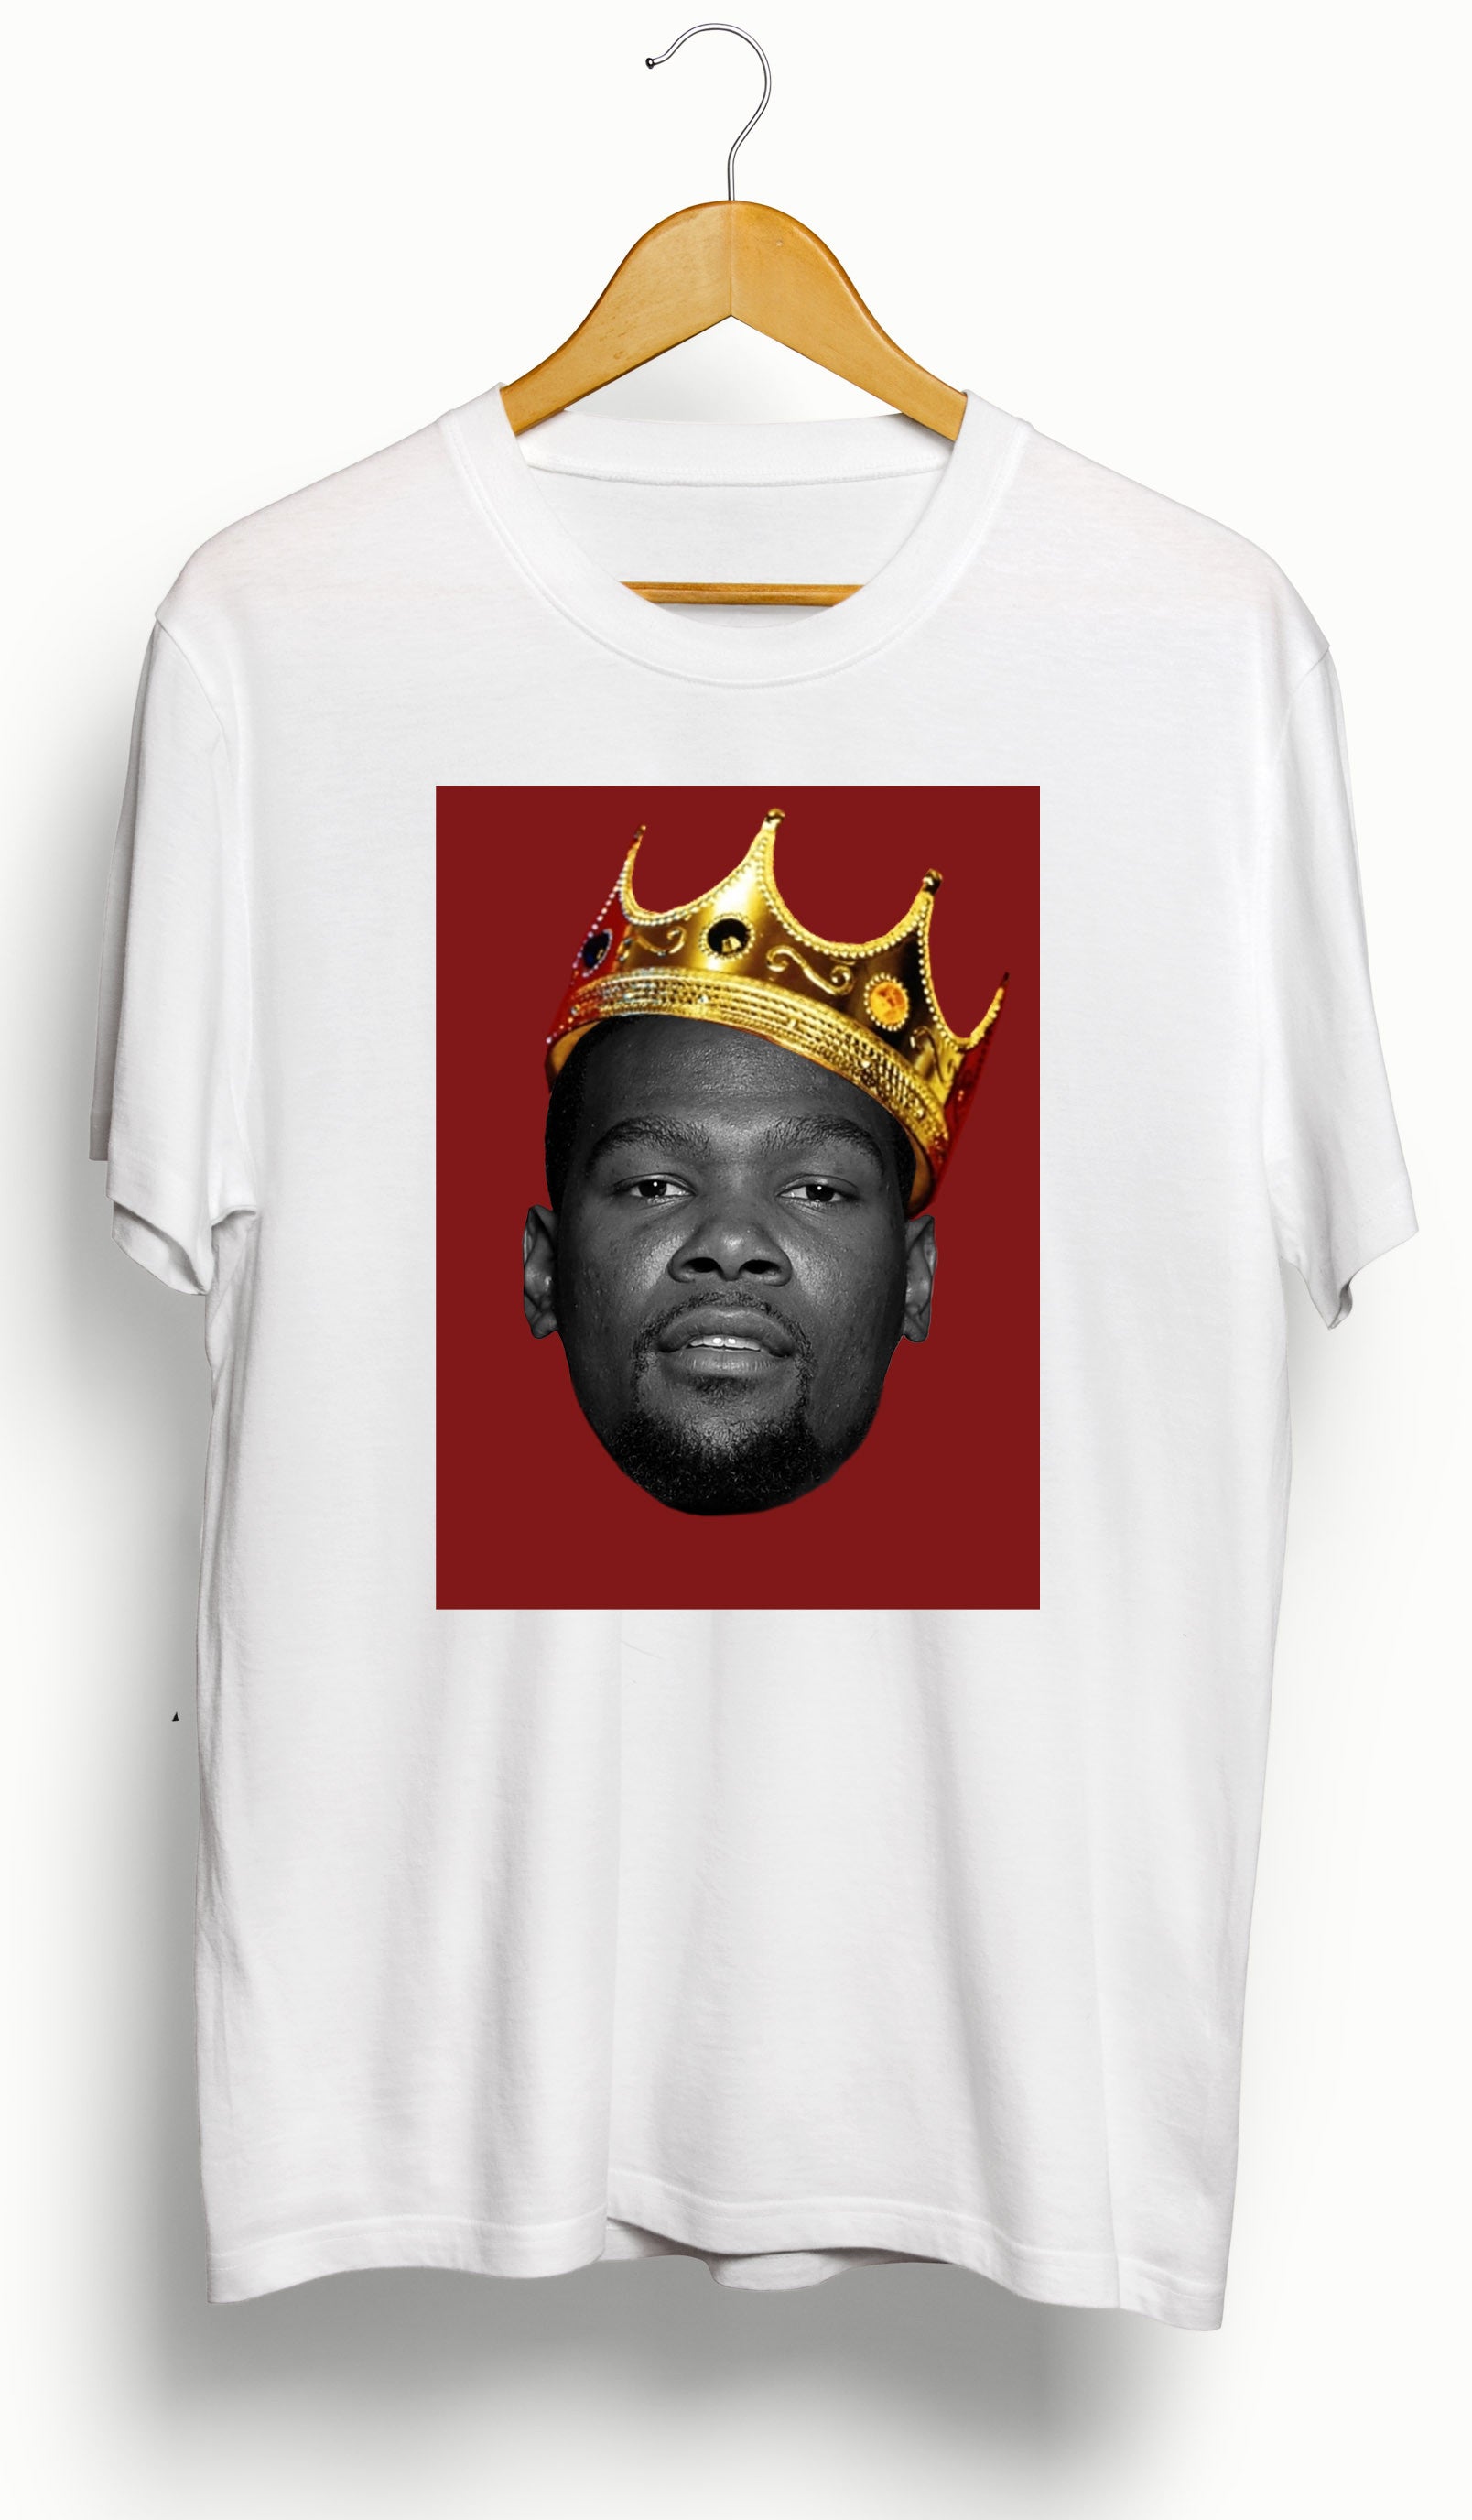 Kevin Durant/KD/Golden State Warriors/Biggie King T-Shirt - Ourt